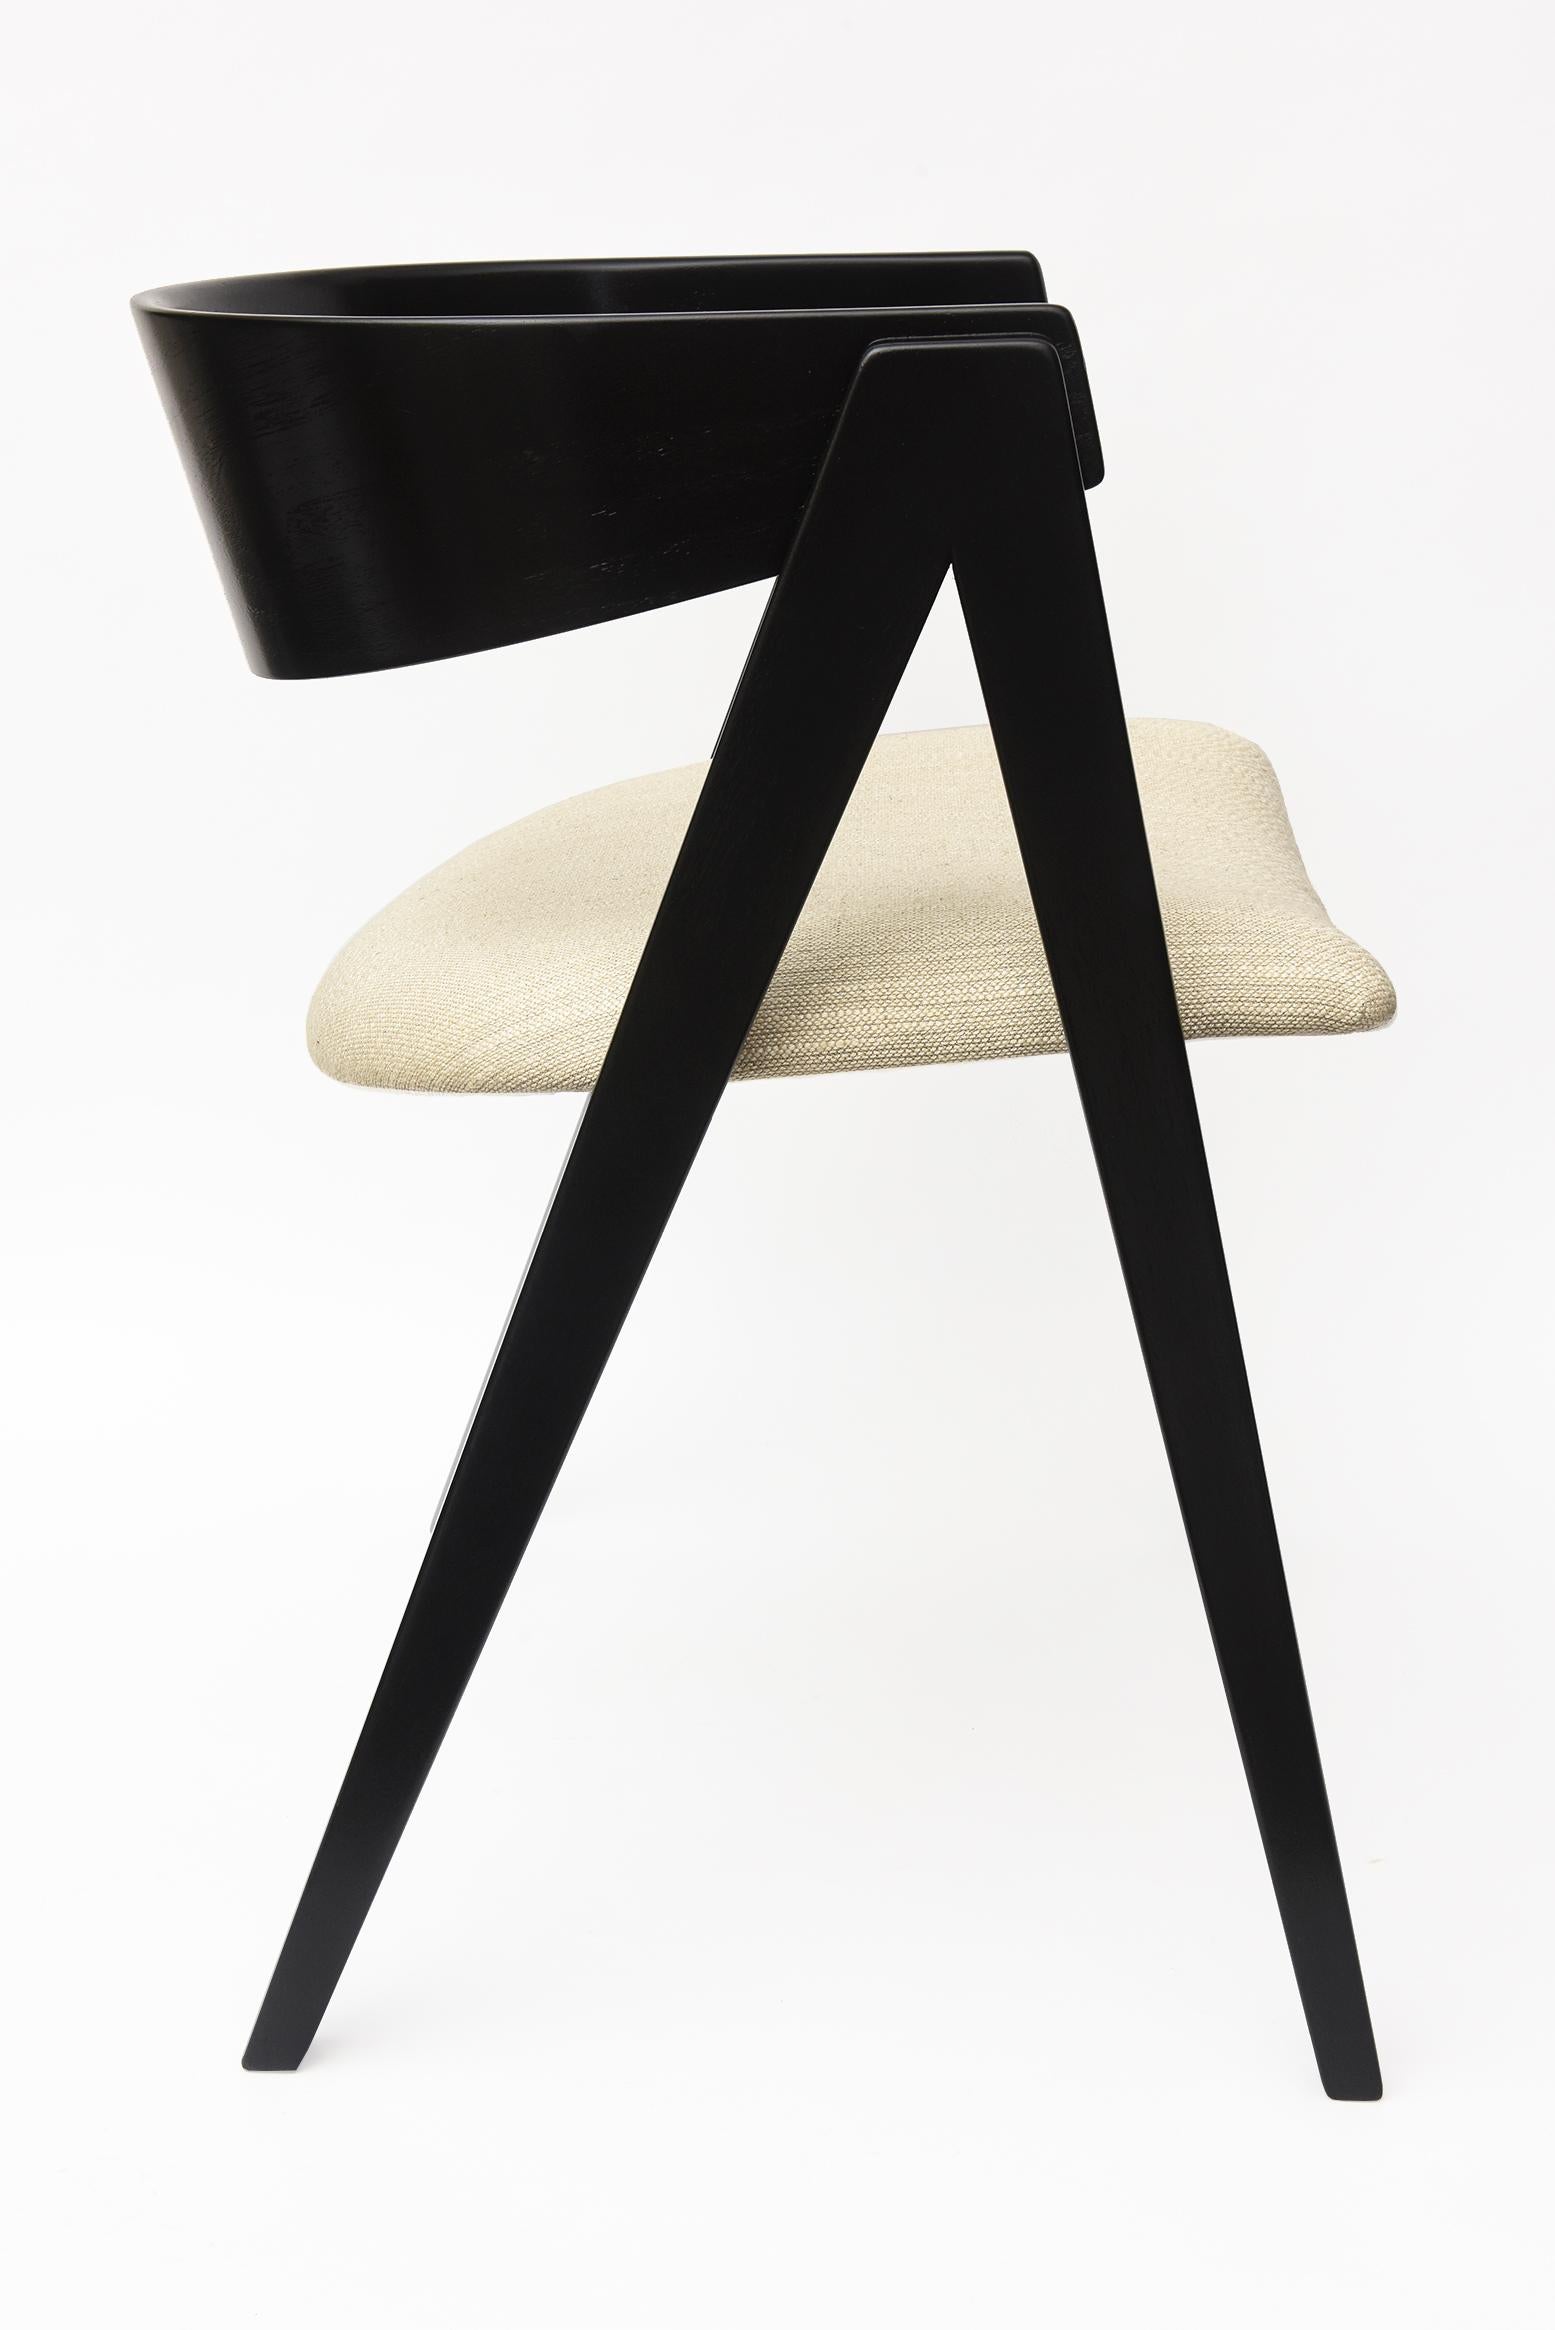 Allan Gould Sculptural Compass Black Stained Wood Side Chair Mid-Century Modern In Good Condition For Sale In North Miami, FL